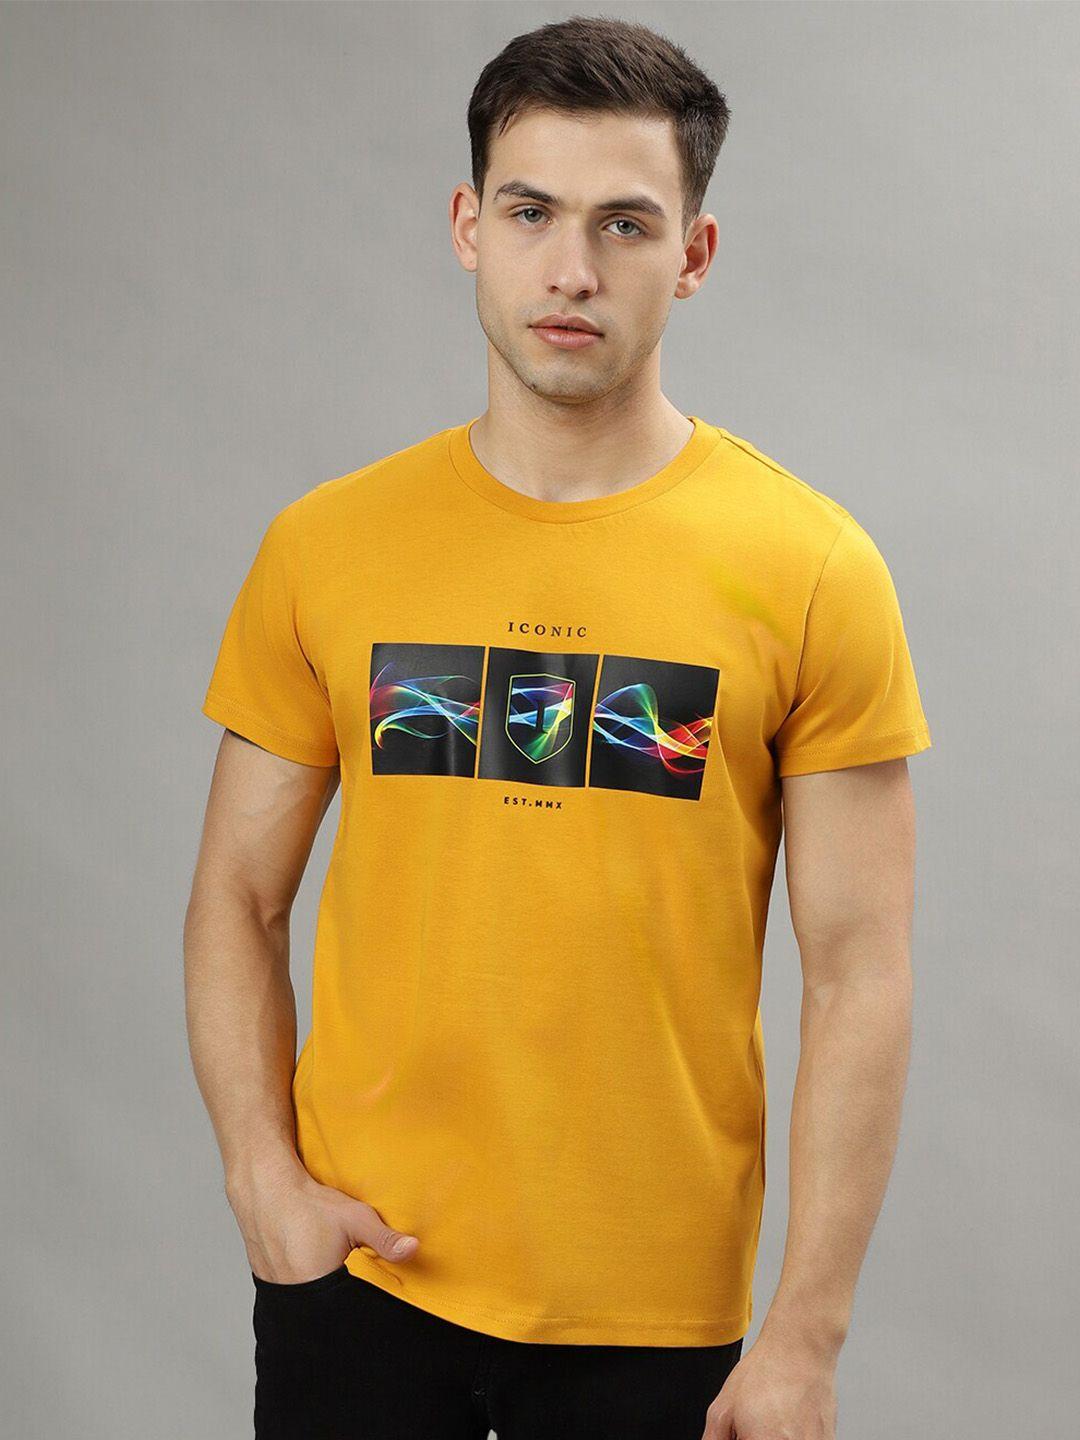 iconic graphic printed pure cotton t-shirt